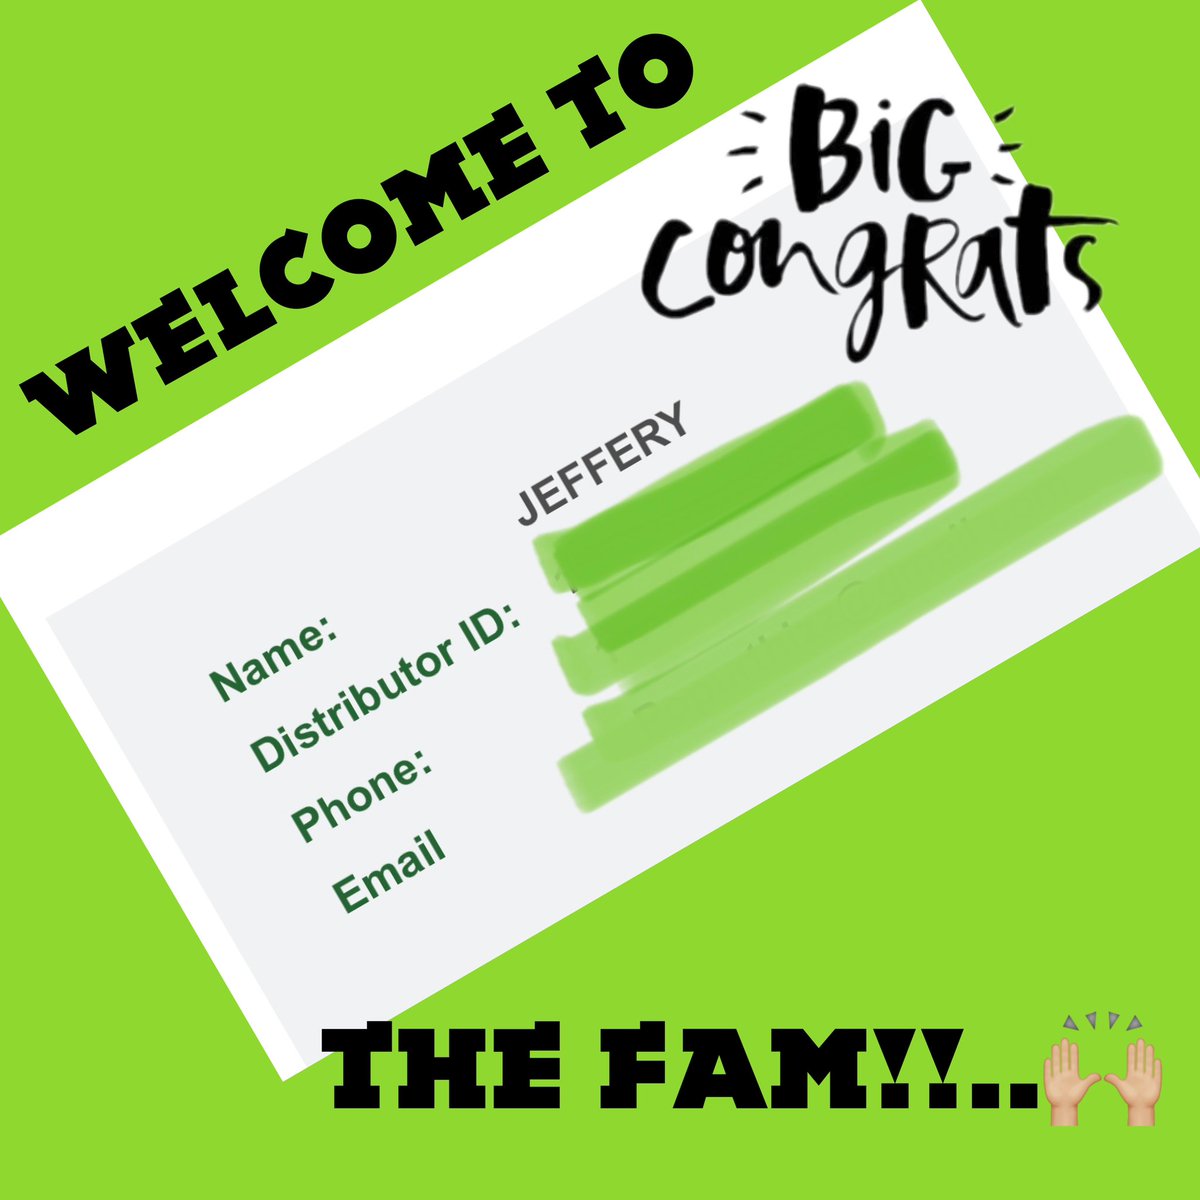 MY BEAUTIFUL PEOPLE I WANT TO PRESENT TO YOU A NEW MEMBER OF THE FAMILY!!!…👏🏼 WELCOME TO OUR TEAM!!!…🙌🏼. LET’S DO THIS..💪🏼 @JefferyBoudin …YEEAAAHH!!!